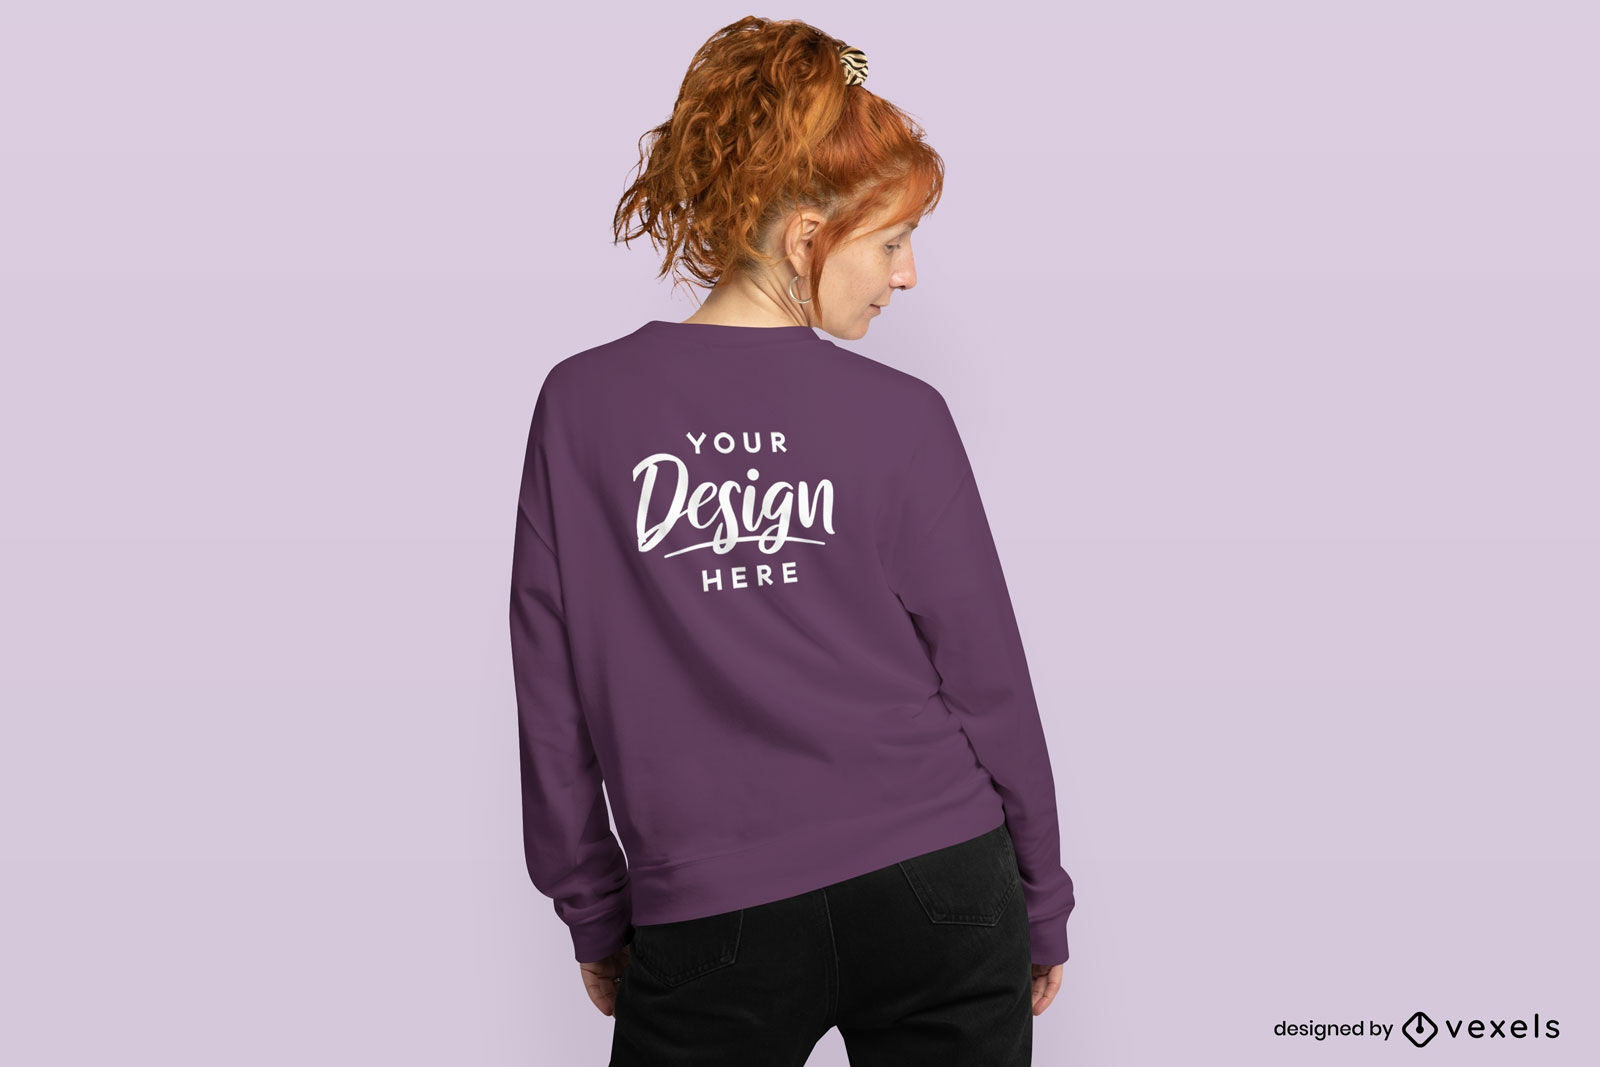 Red hair woman with ponytail and purple sweatshirt mockup